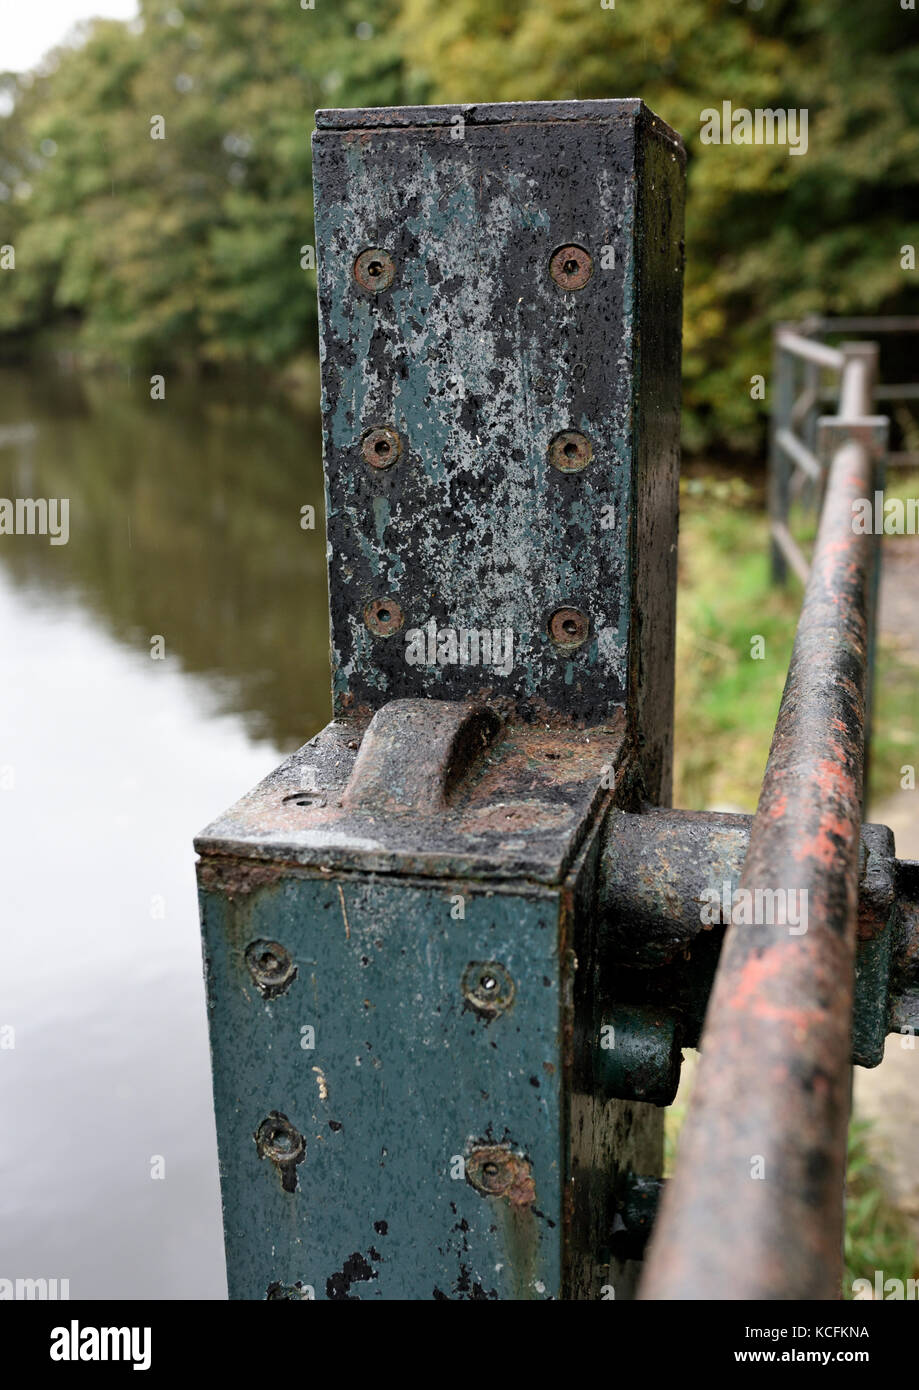 Metal gear housing attached to hand rail at the side of the river Irwel withsoft focus blurred river and trees, Burrs country park bury lancashire uk Stock Photo